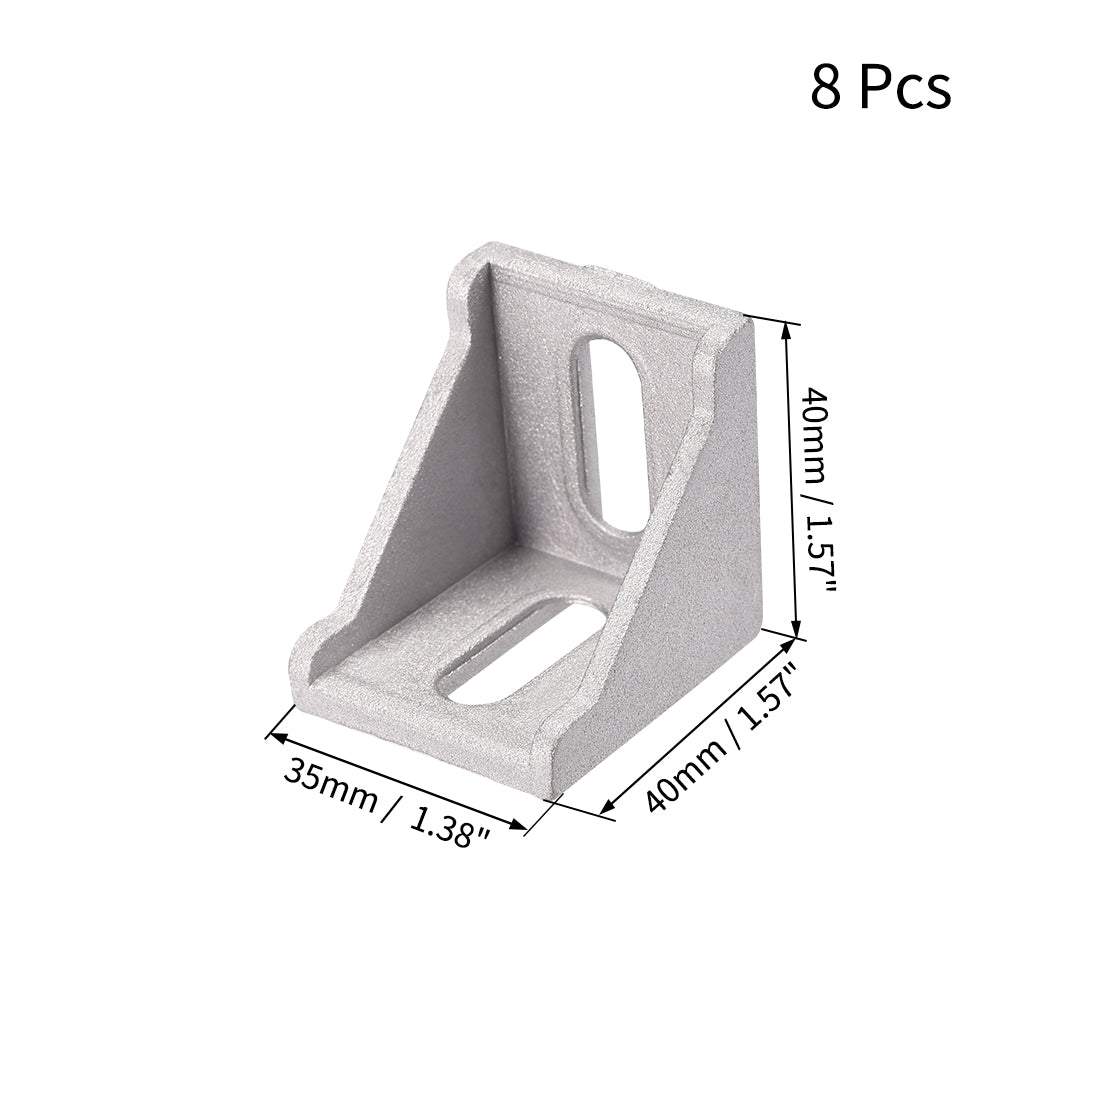 uxcell Uxcell Inside Corner Bracket Gusset, 40mm x 40mm for 4040 Series Aluminum Extrusion Profile with Slot 8mm, 8 Pcs (Silver)